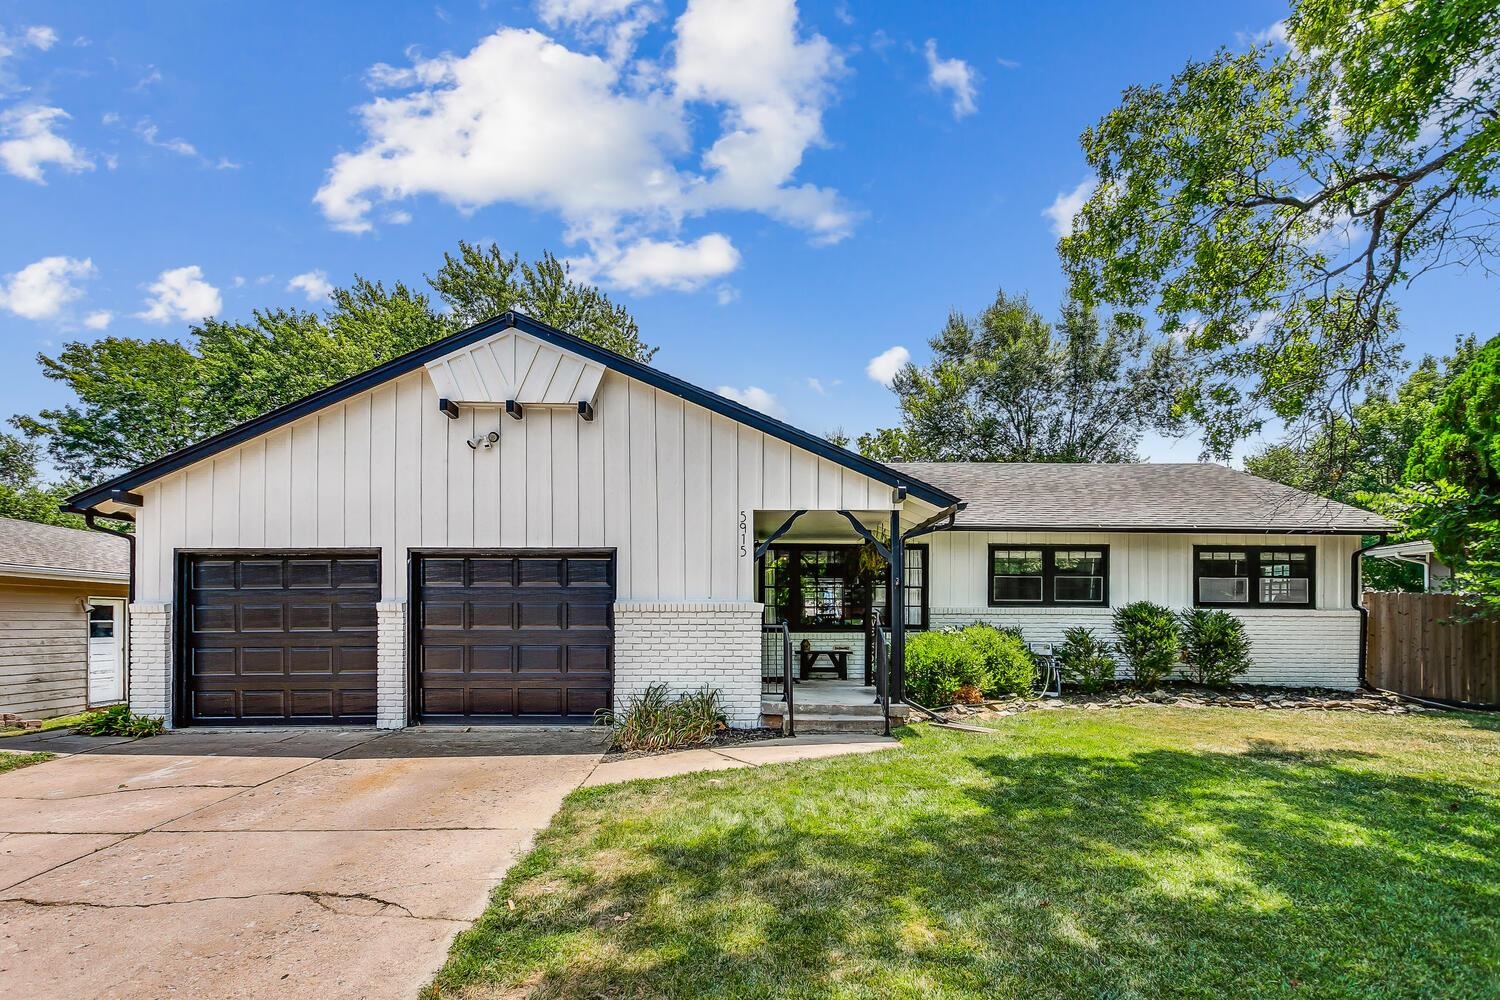 Welcome home to this beautiful ranch house located in the desirable Bel Aire community. This home fe